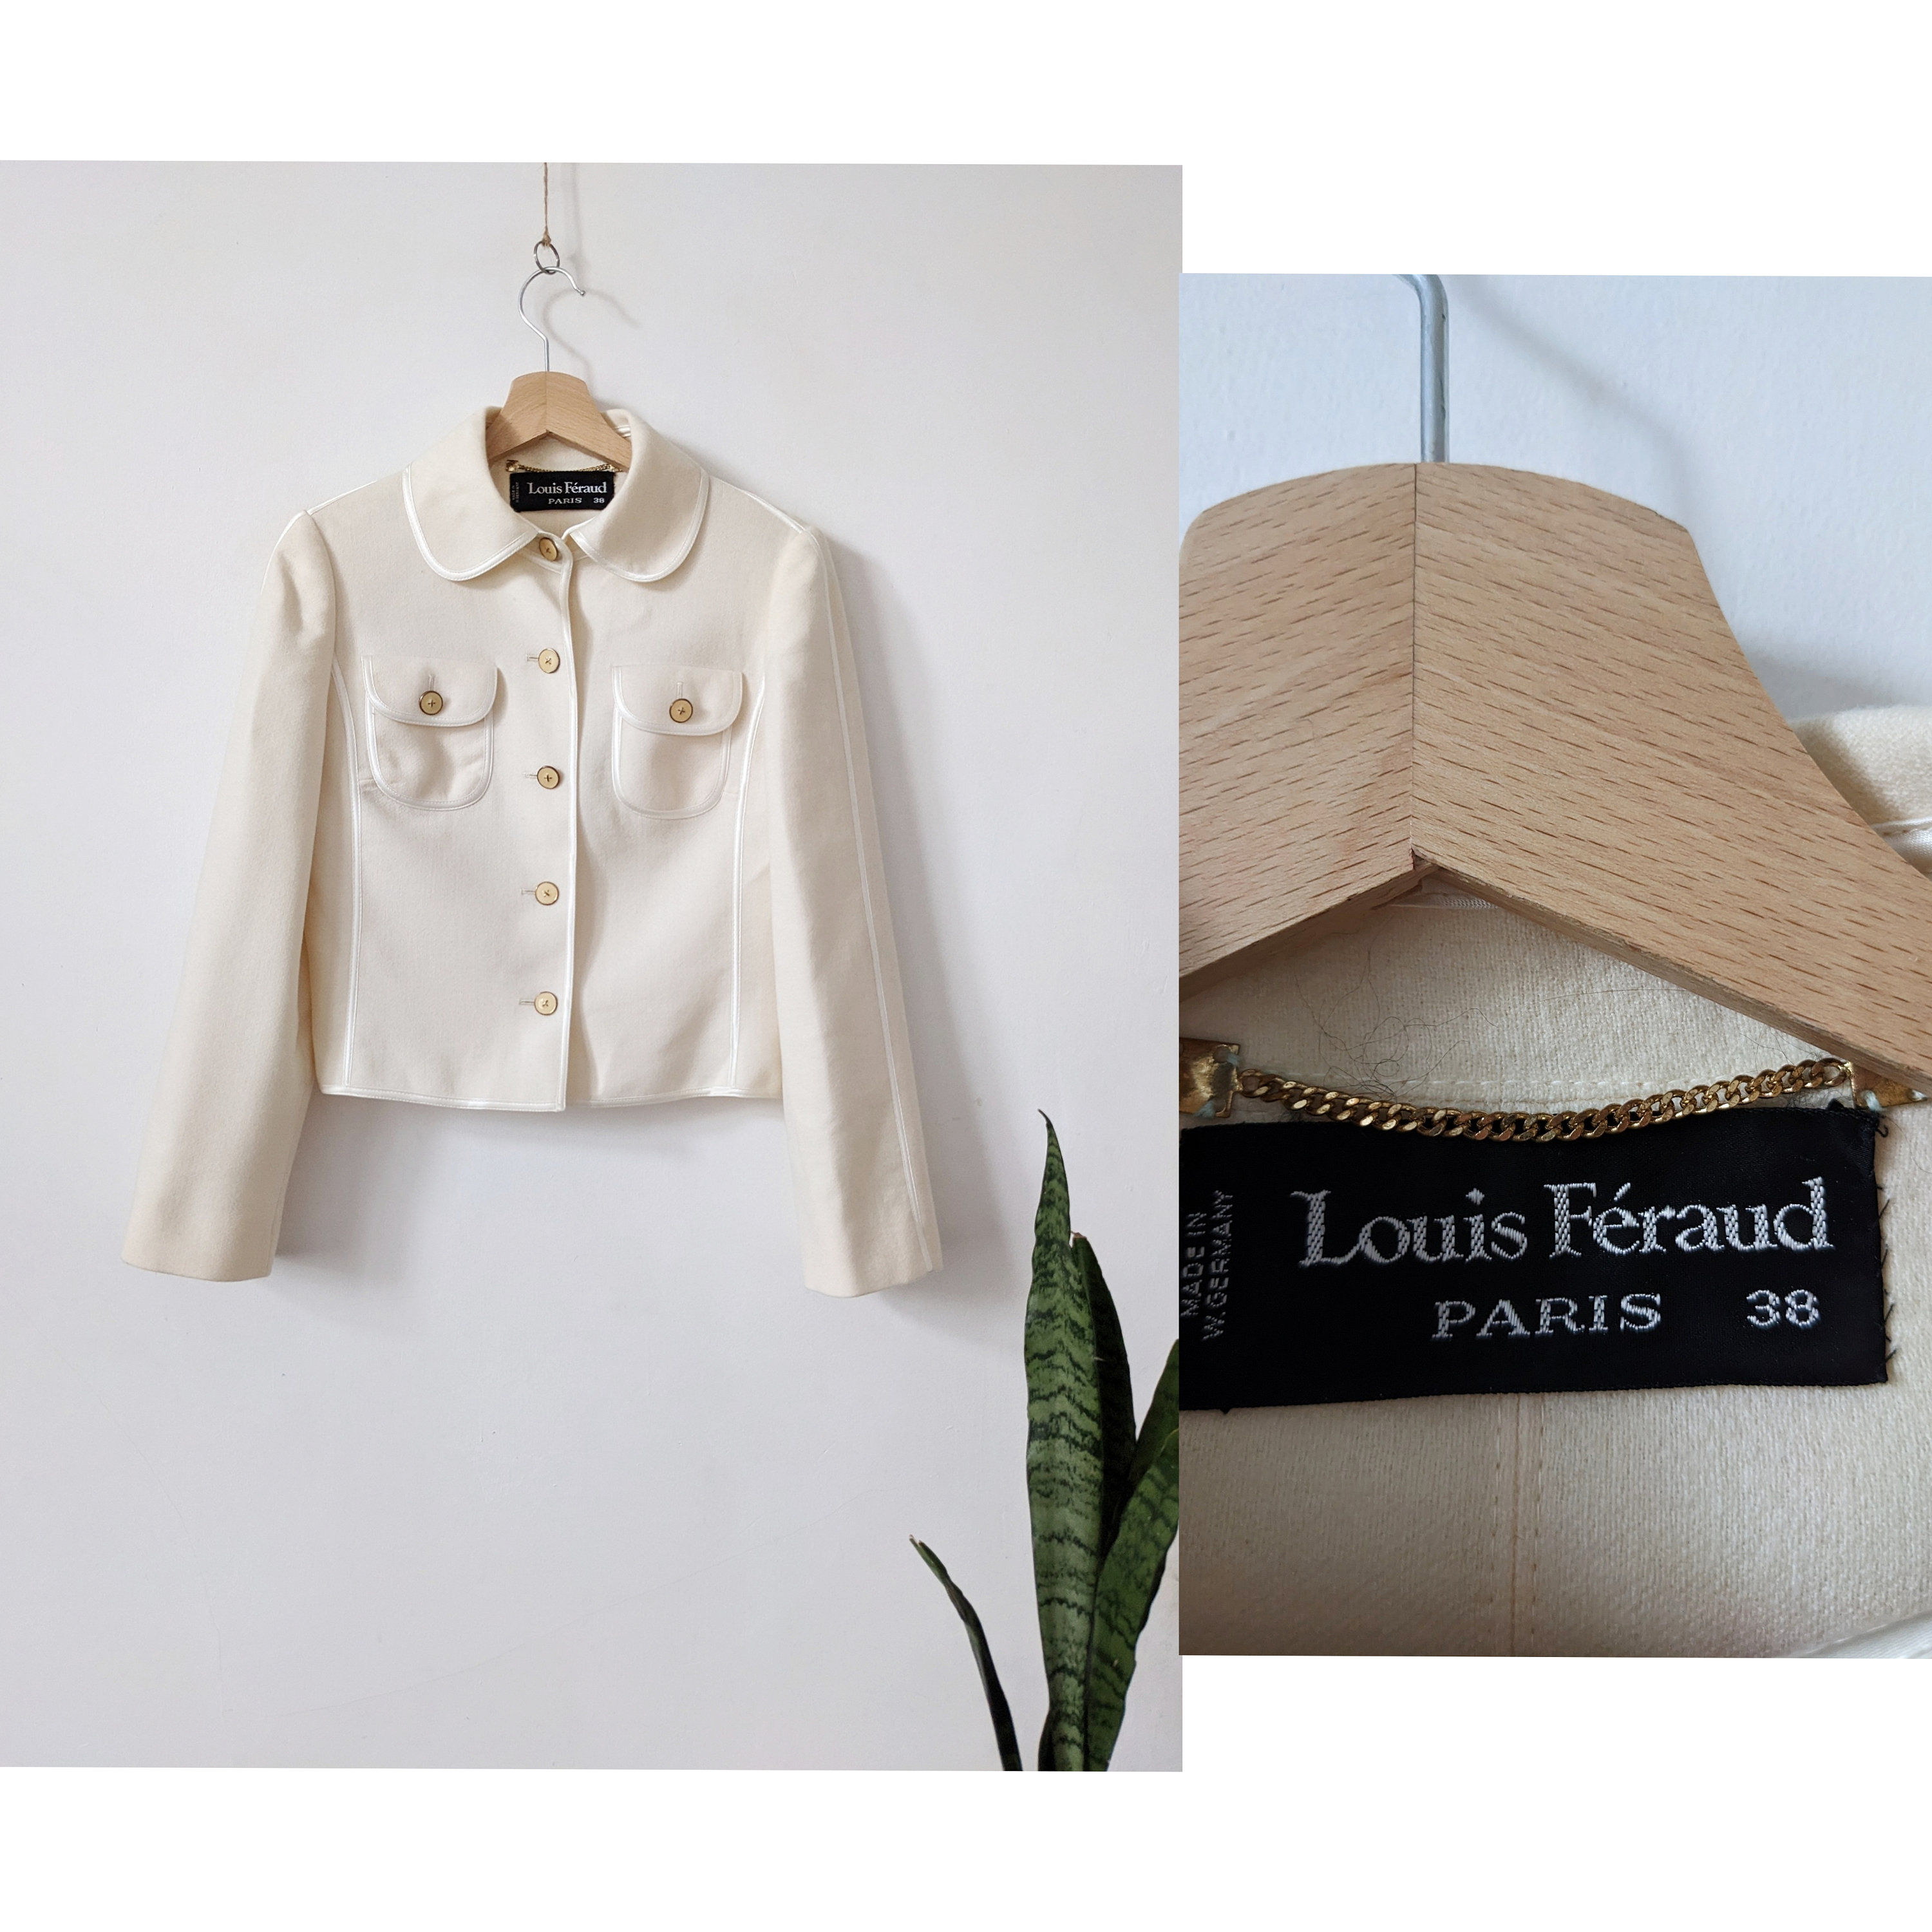 Sold at Auction: Louis Féraud, Louis Feraud Jacket ensemble with